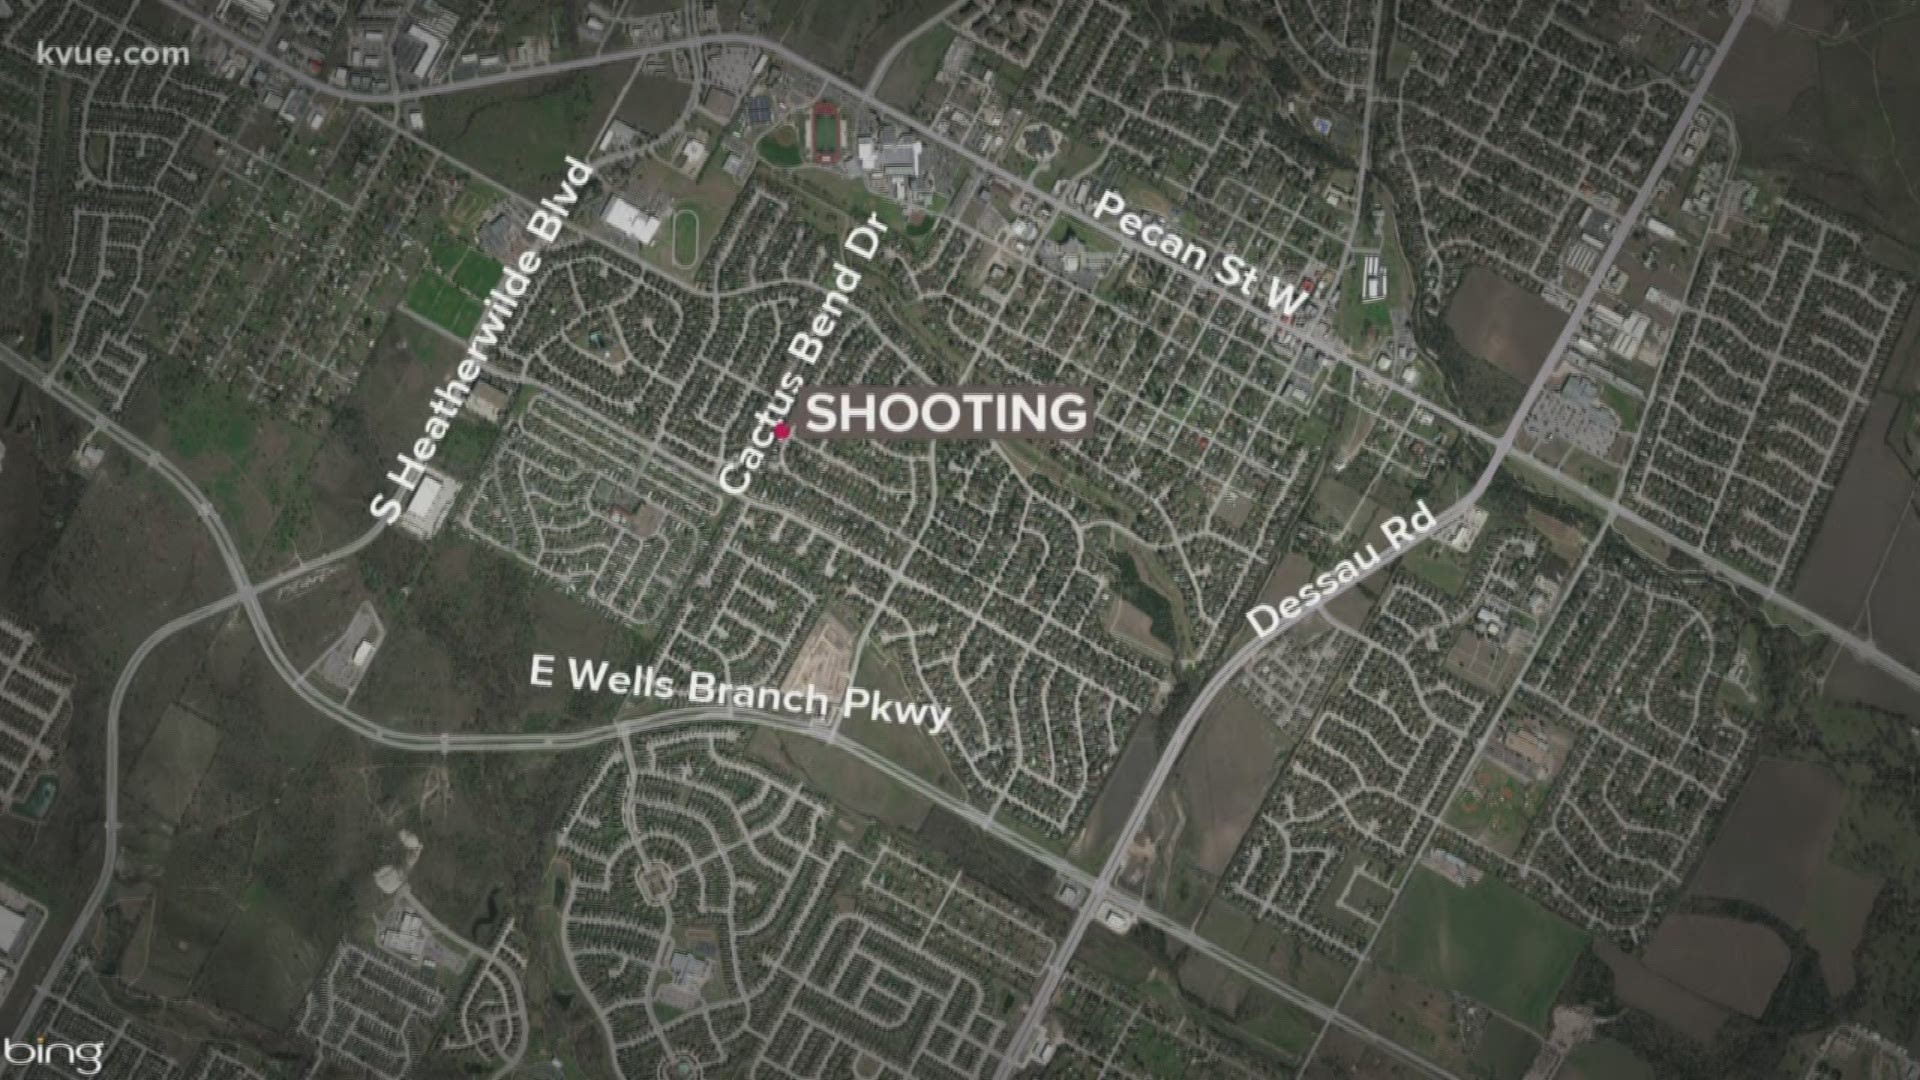 Police say the public isn't in any danger after someone was shot in a Pflugerville neighborhood.